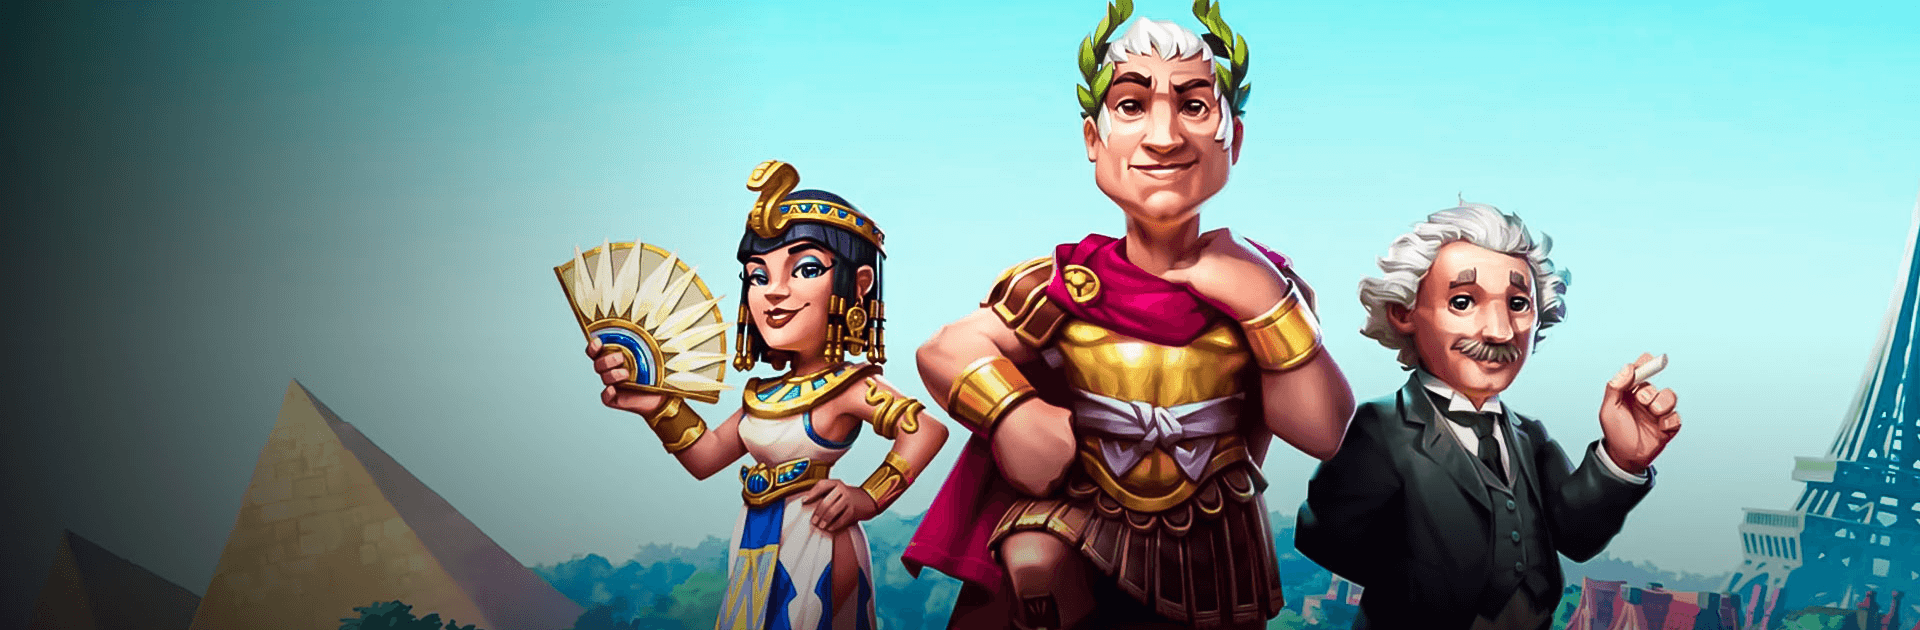 Play Rise of Cultures: Kingdom game Online